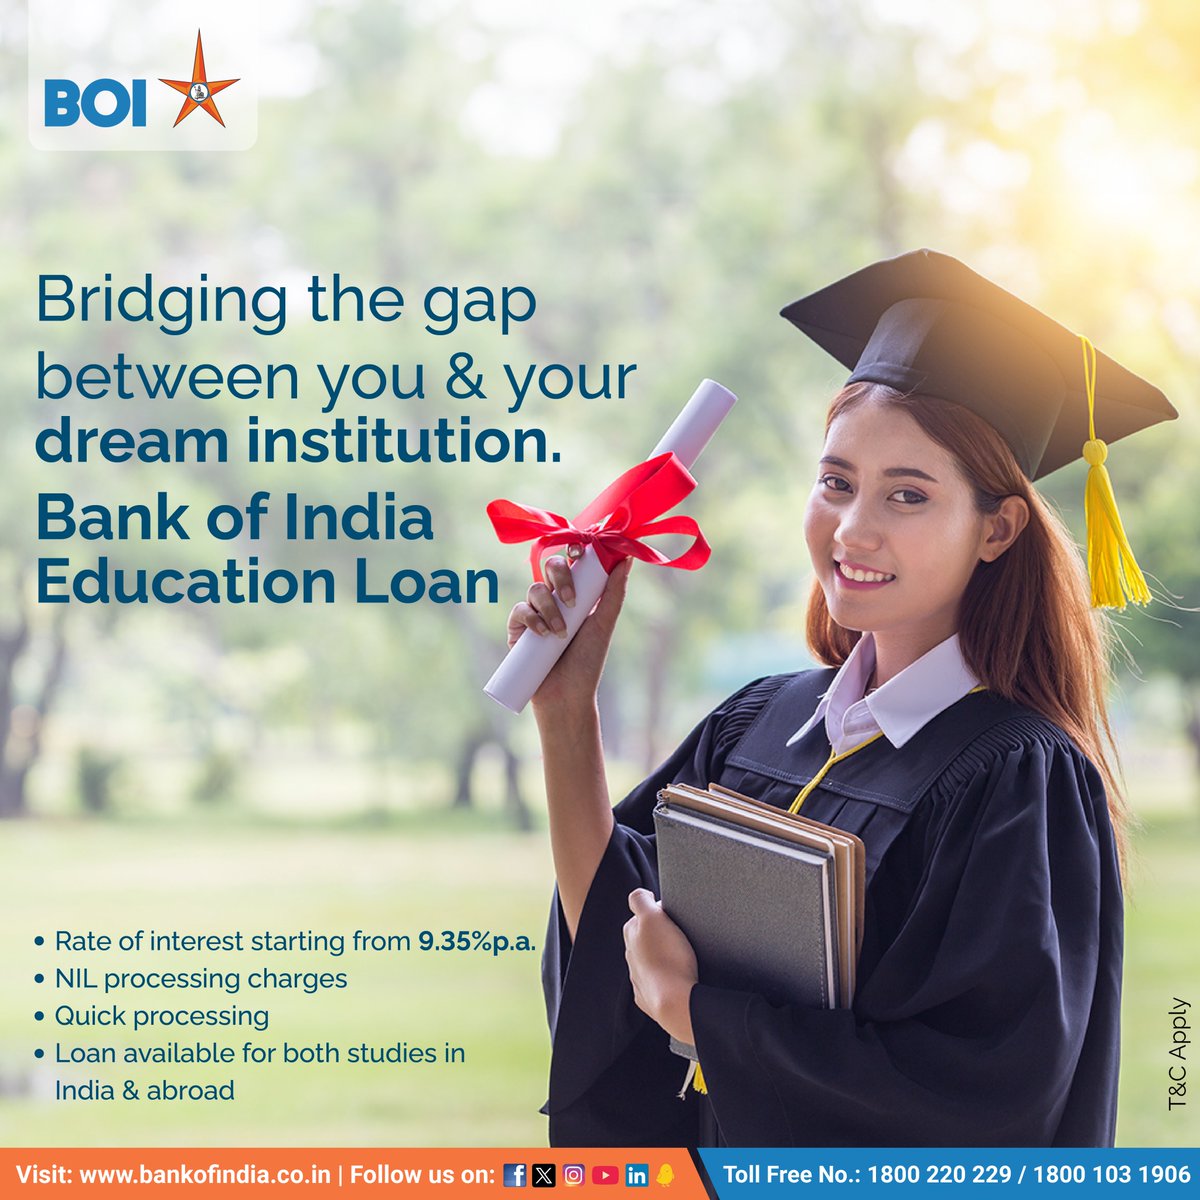 With Bank of India’s education loan options, the best college/university is now within your reach. Apply Now: bit.ly/3o2x3bO
#BankofIndia #educationloan #education #aspirations #opportunity